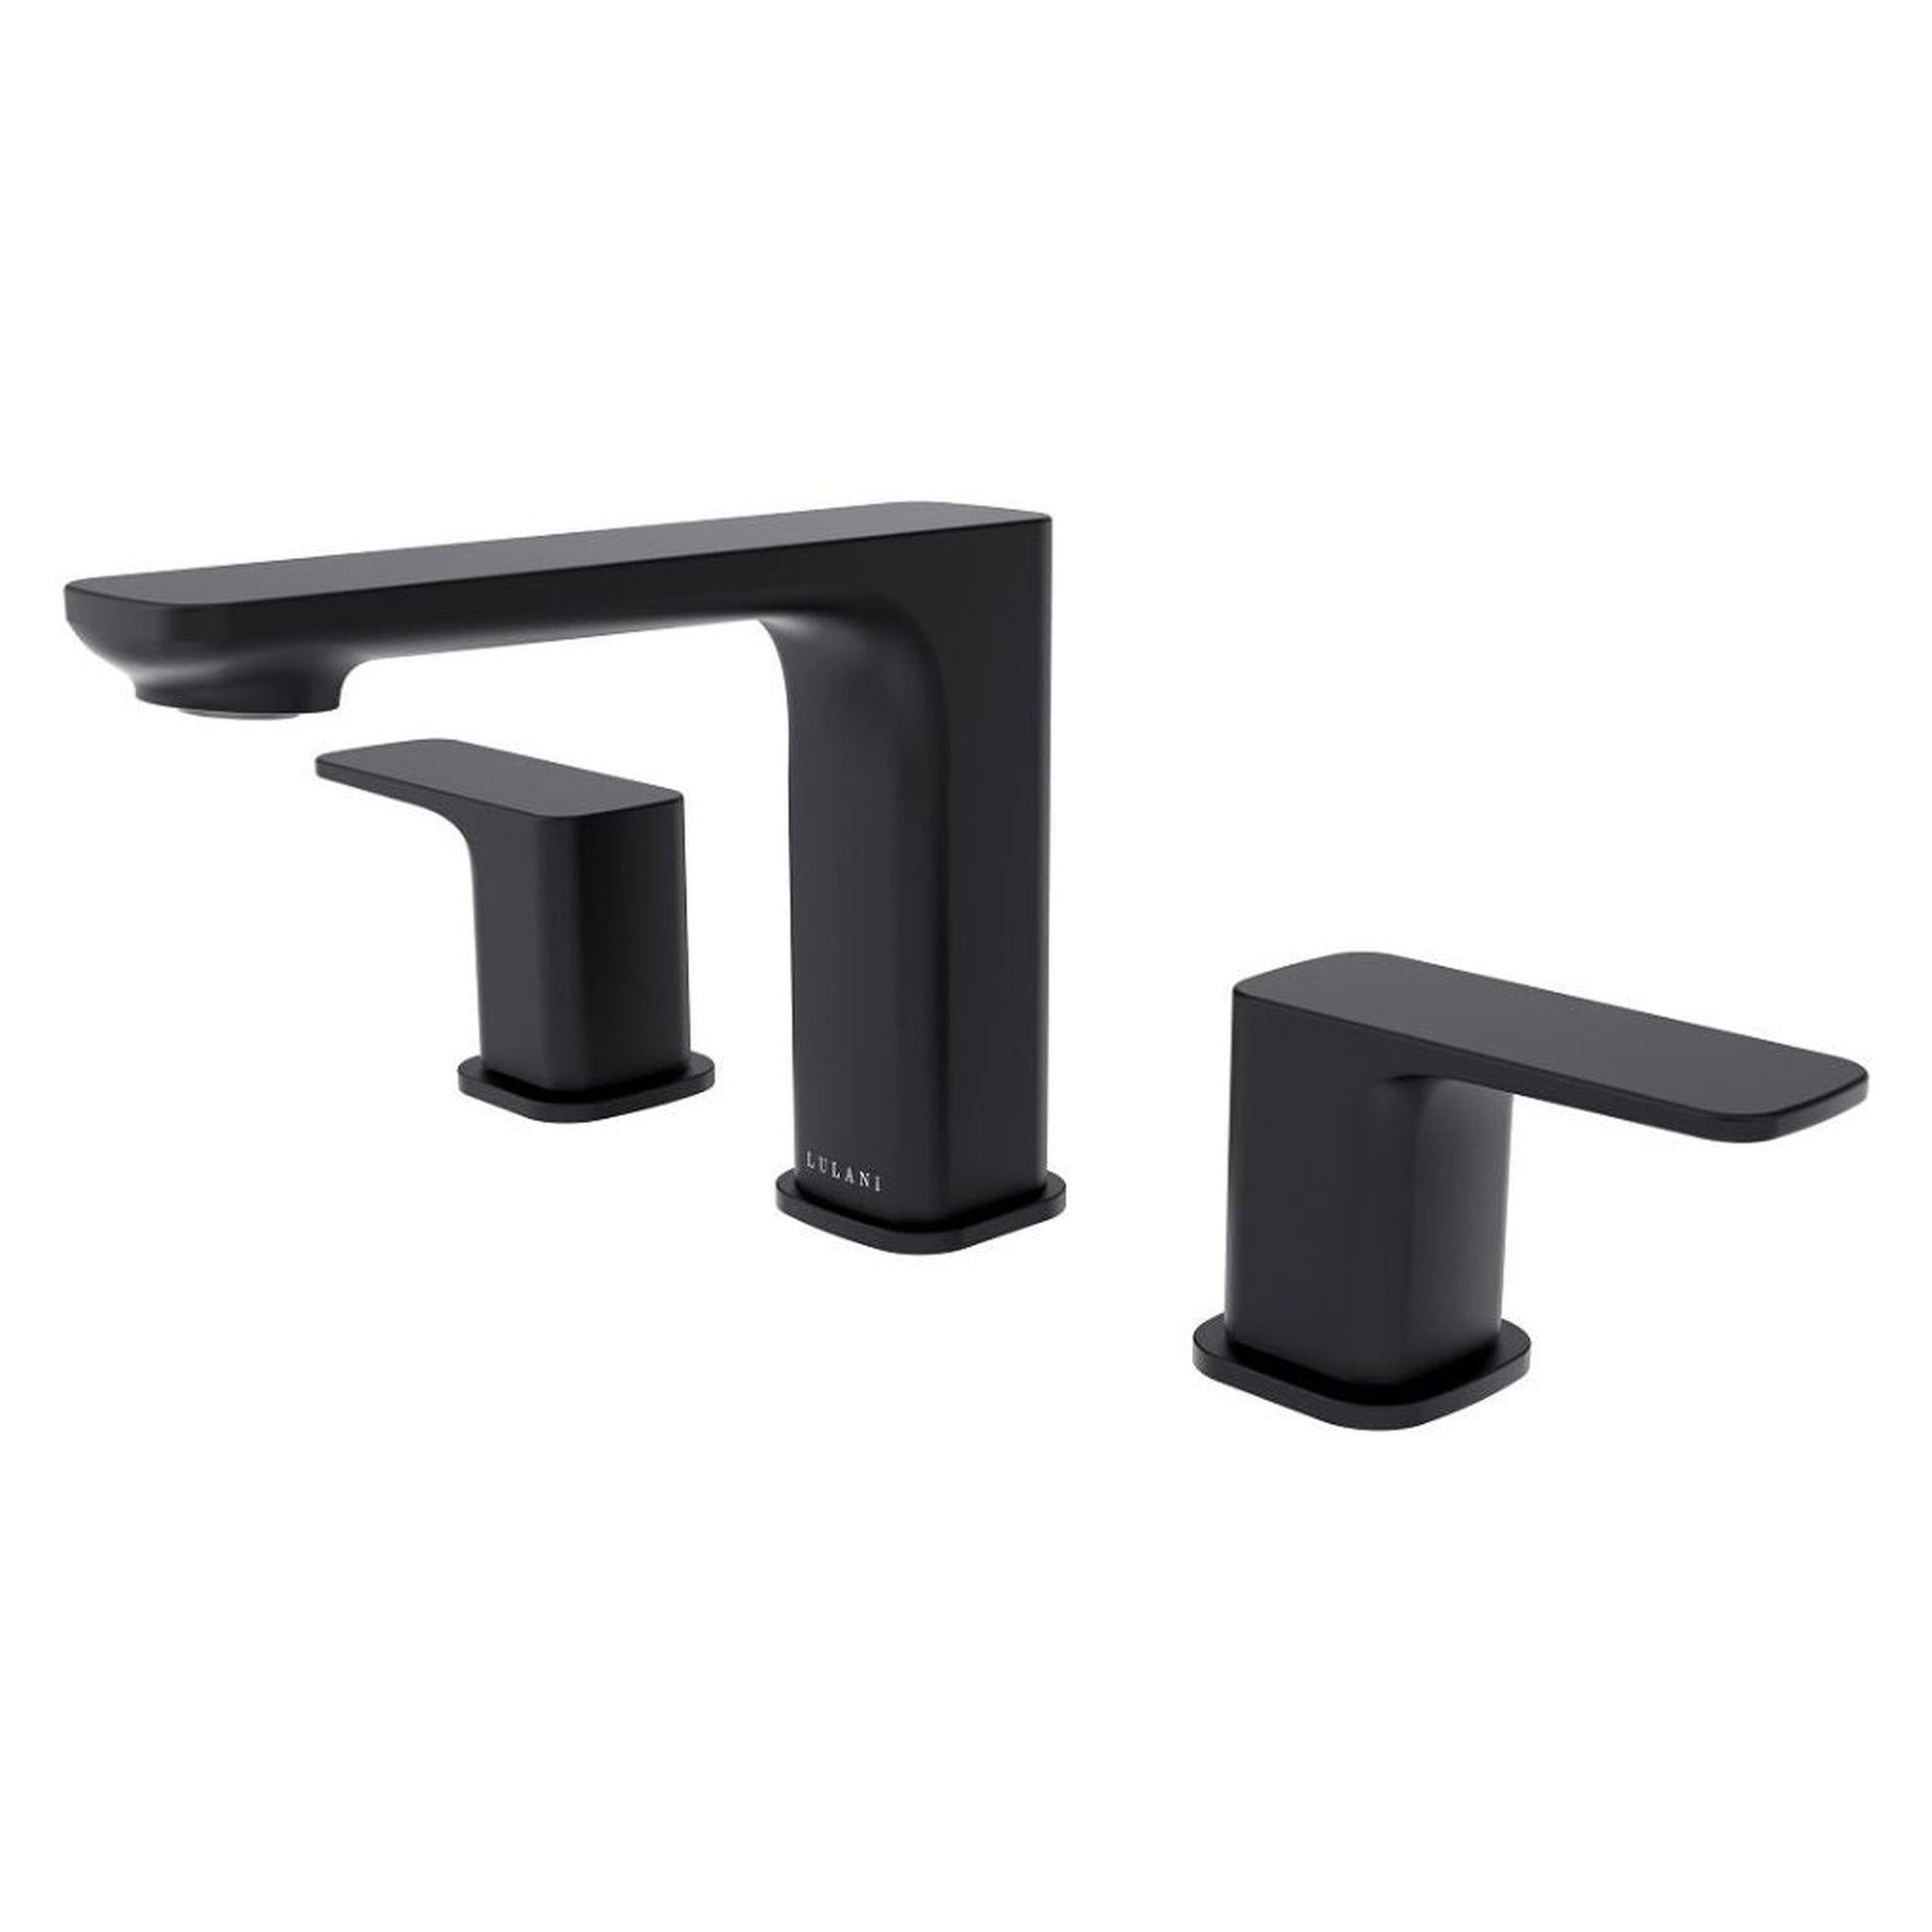 Lulani Corsica Matte Black 1.2 GPM Two Handle Widespread Faucet With Drain Assembly